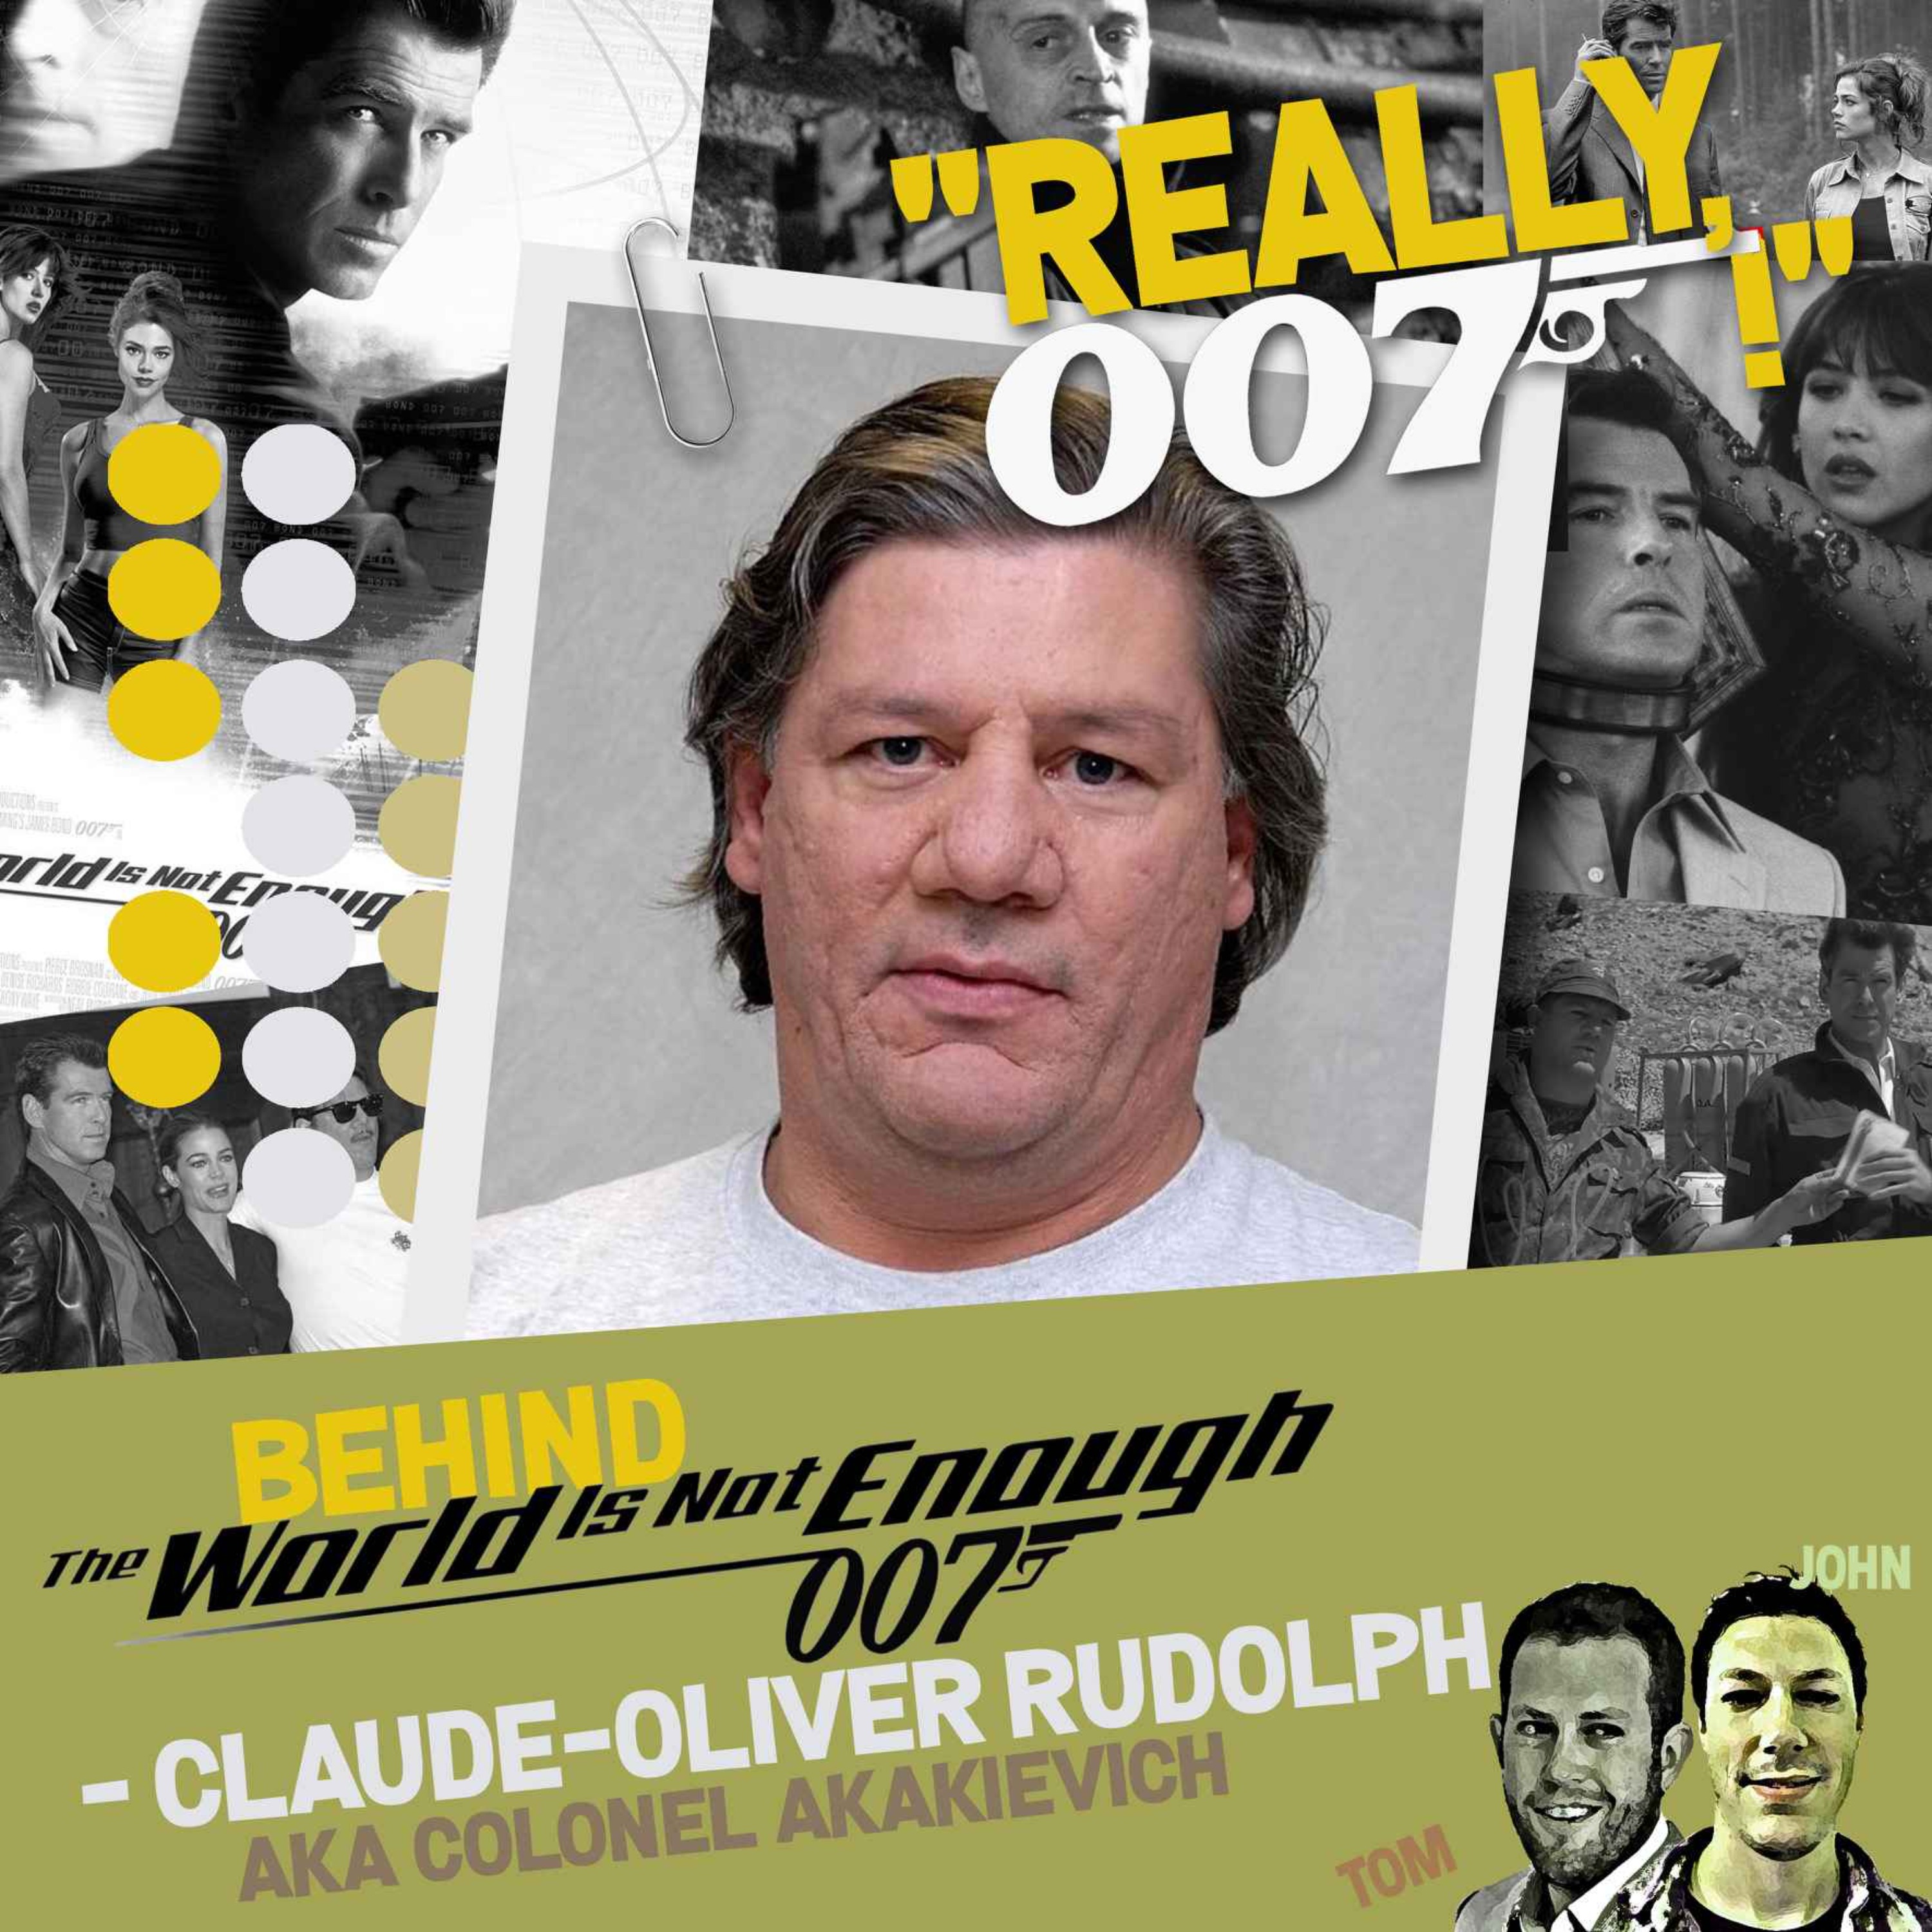 cover art for Behind The World Is Not Enough - Claude-Oliver Rudolph aka Colonel Akakievich interview